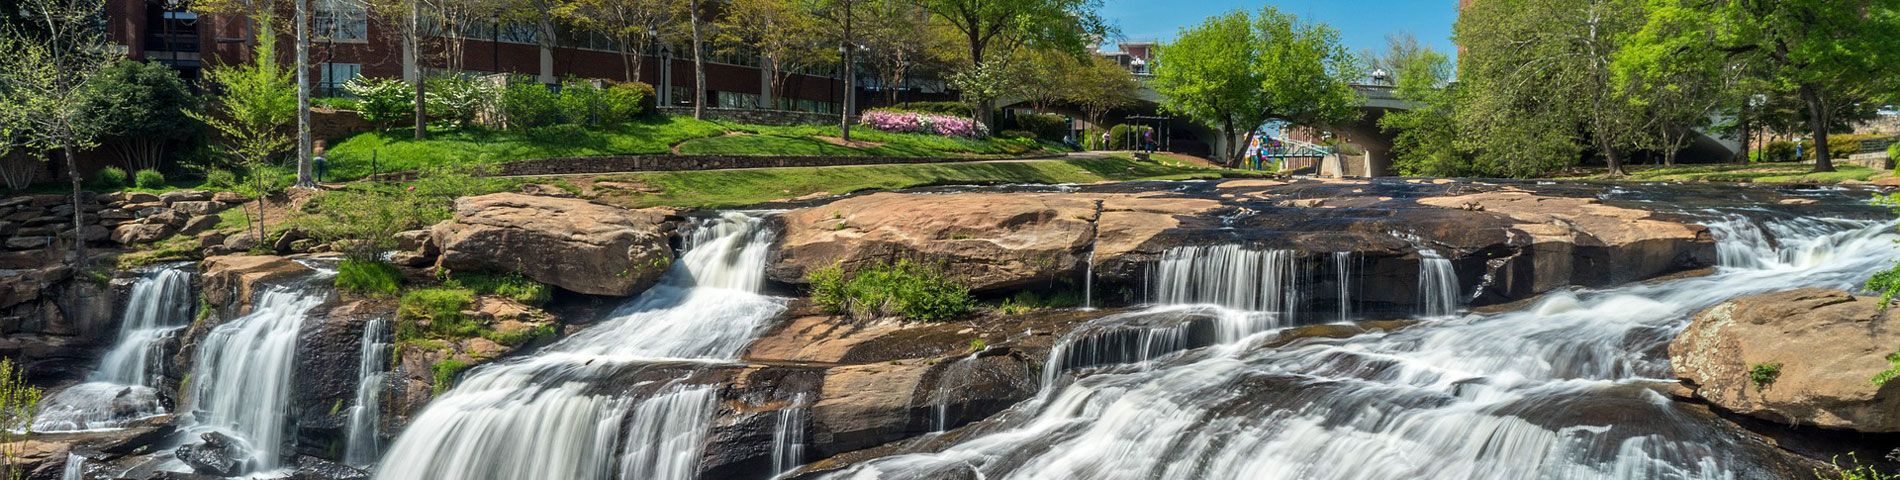 10 Things to Do in Greenville, SC